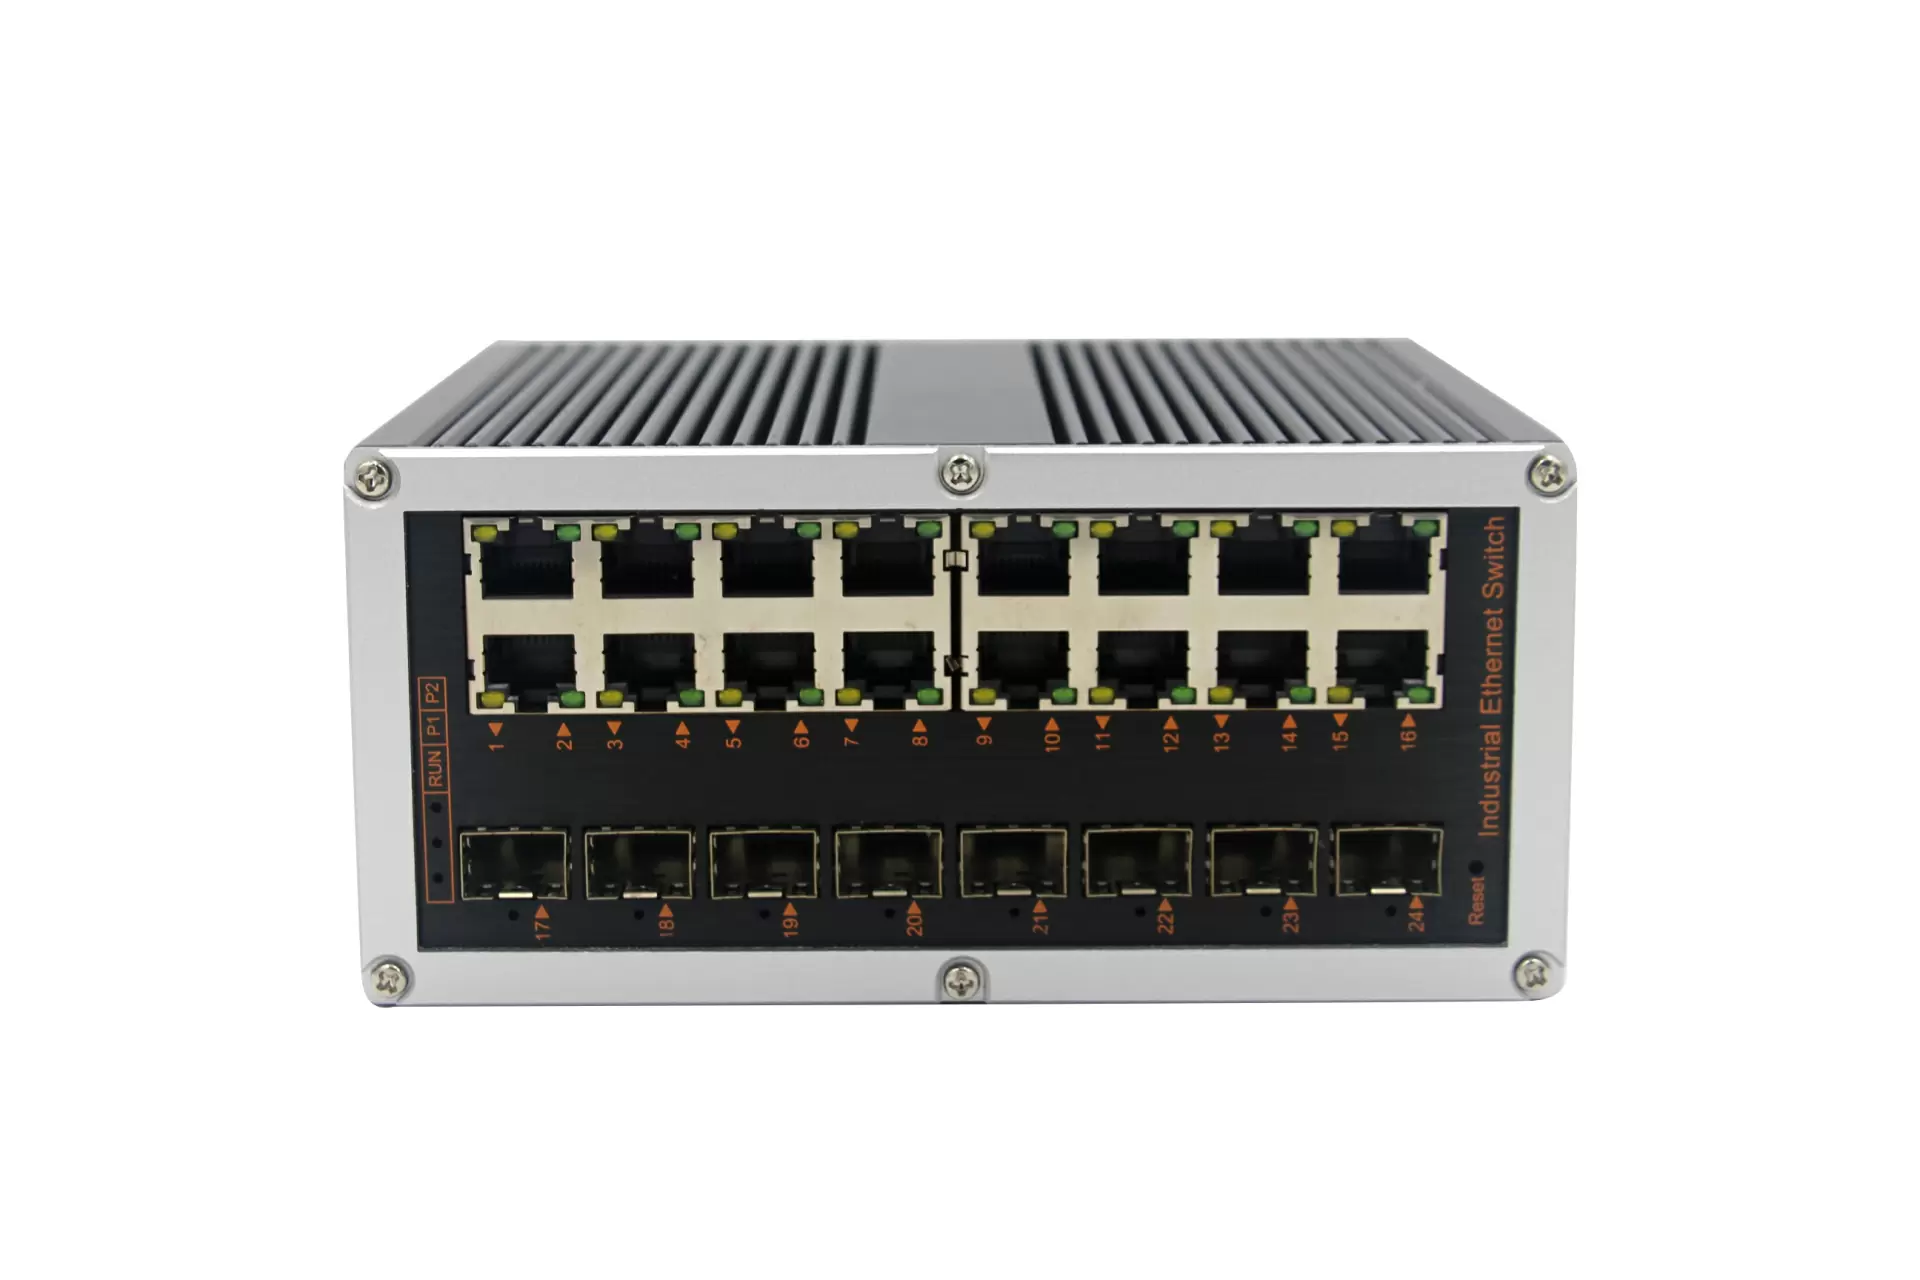 How much power does a 16 port PoE switch use?